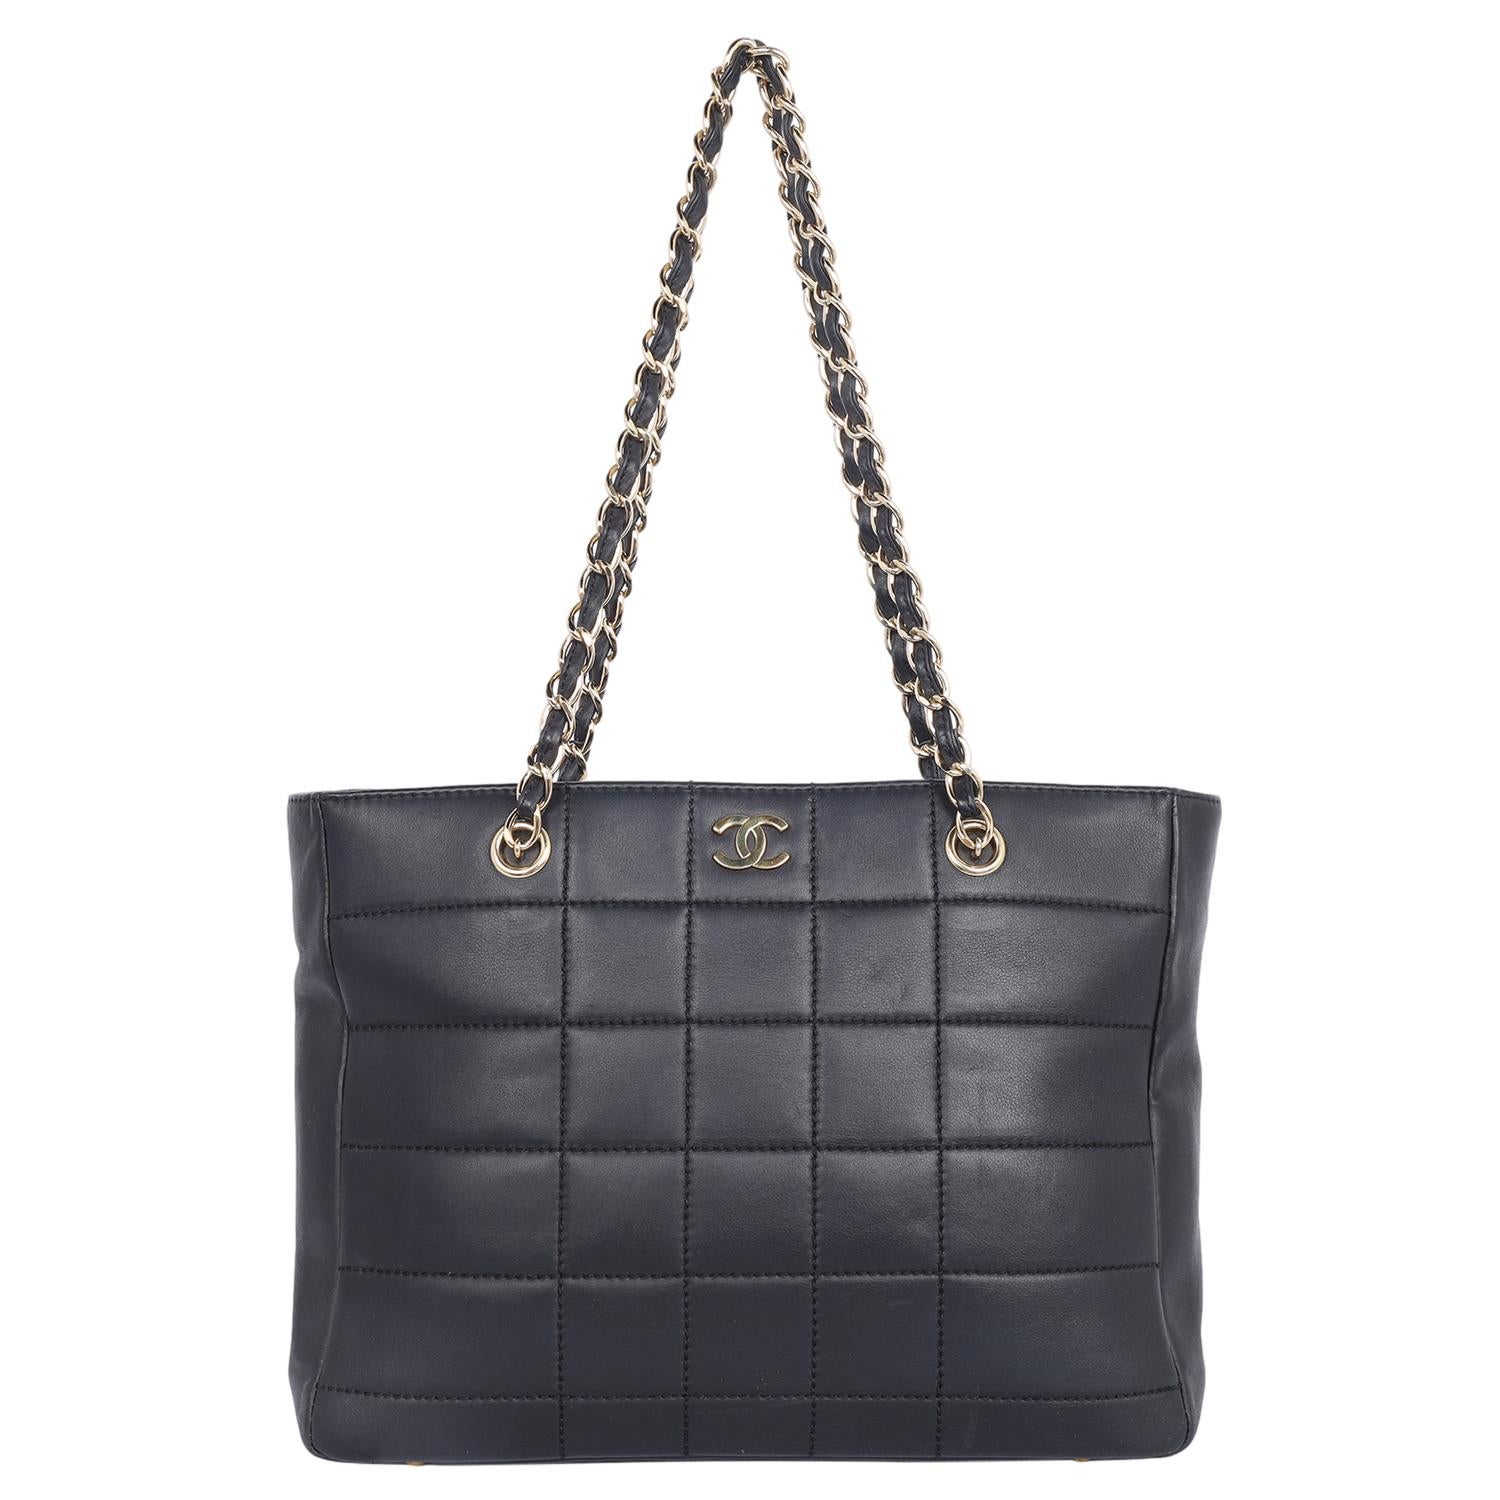 Authentic, pre-loved vintage Chanel black classic Choco Bar CC shoulder bag tote. Black was Coco's happiest color and it's displayed in every Chanel collection. Features lambskin black leather, this Chanel shoulder bag has a quilted pattern with a